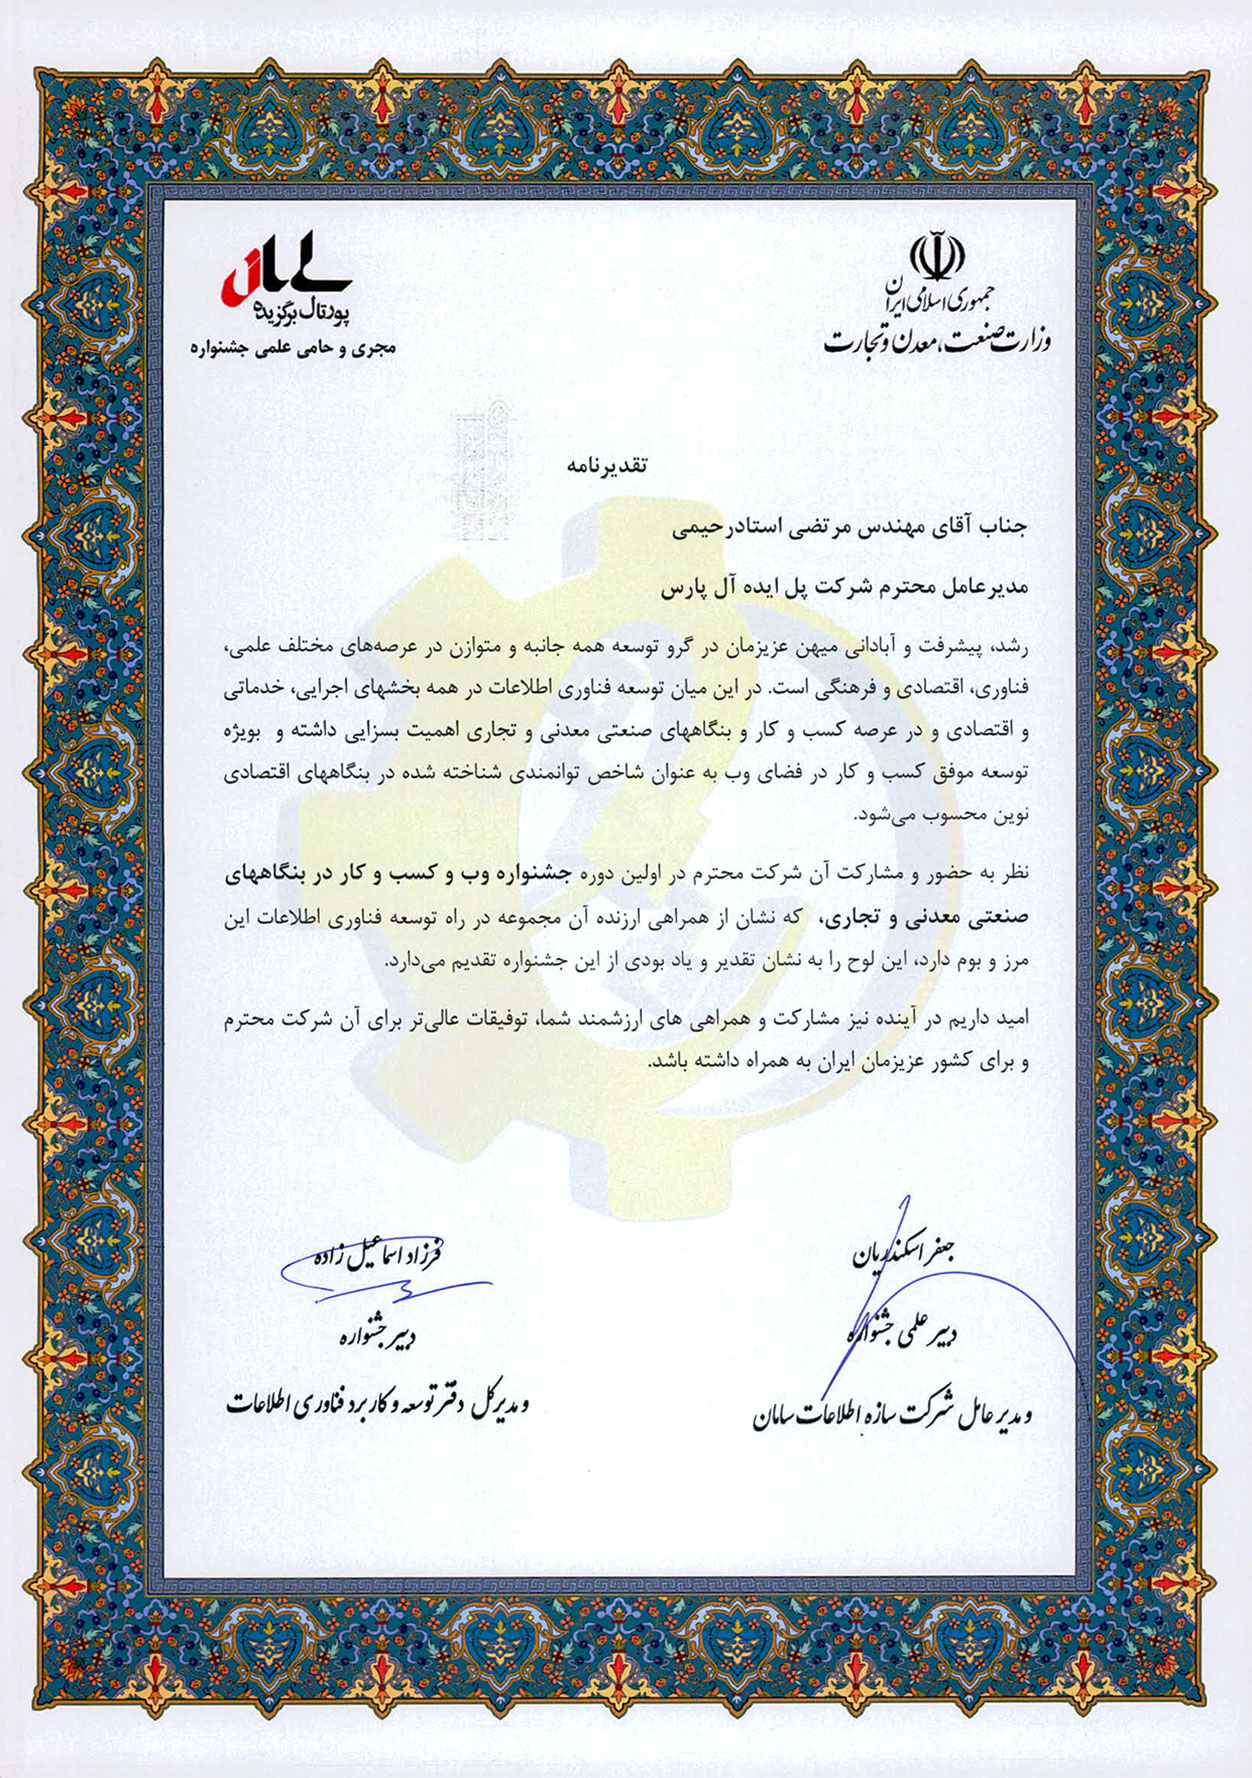 Letter of appreciation from the Ministry of Industries and Mines